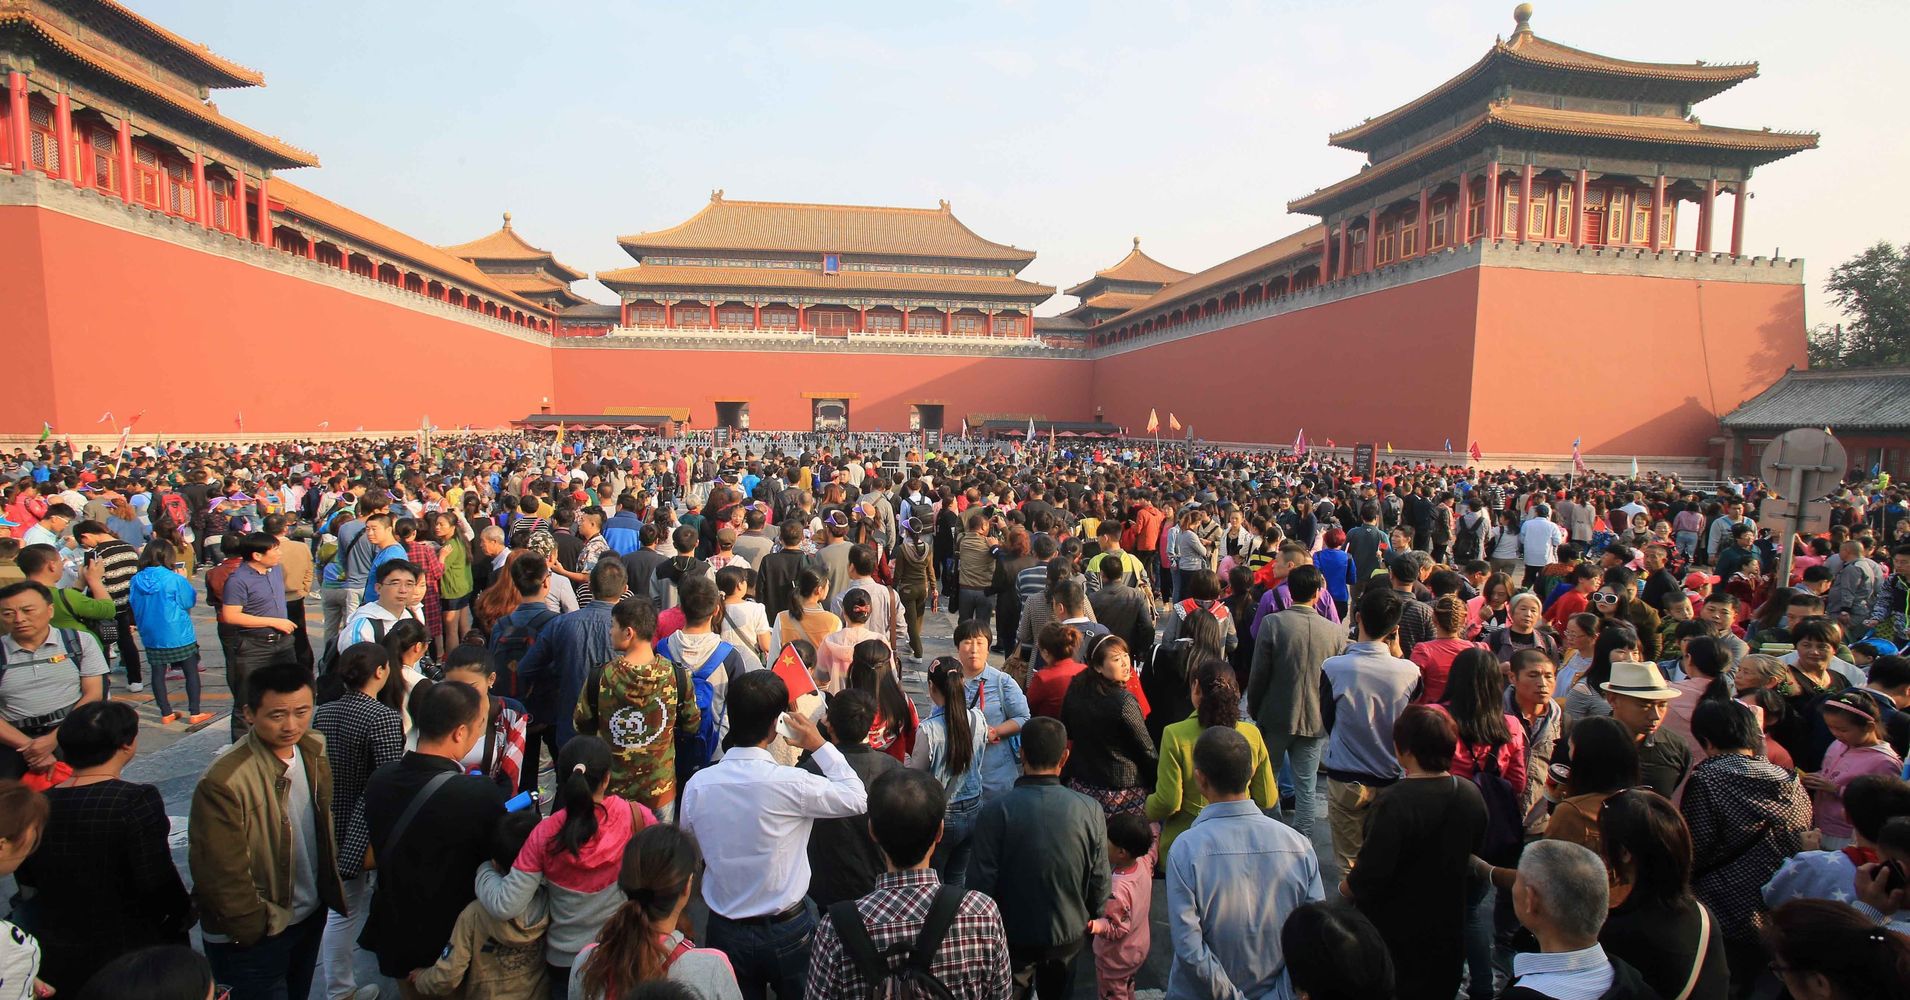 These Photos Show When Not To Visit China If You Don't Like Crowds | HuffPost1910 x 1000